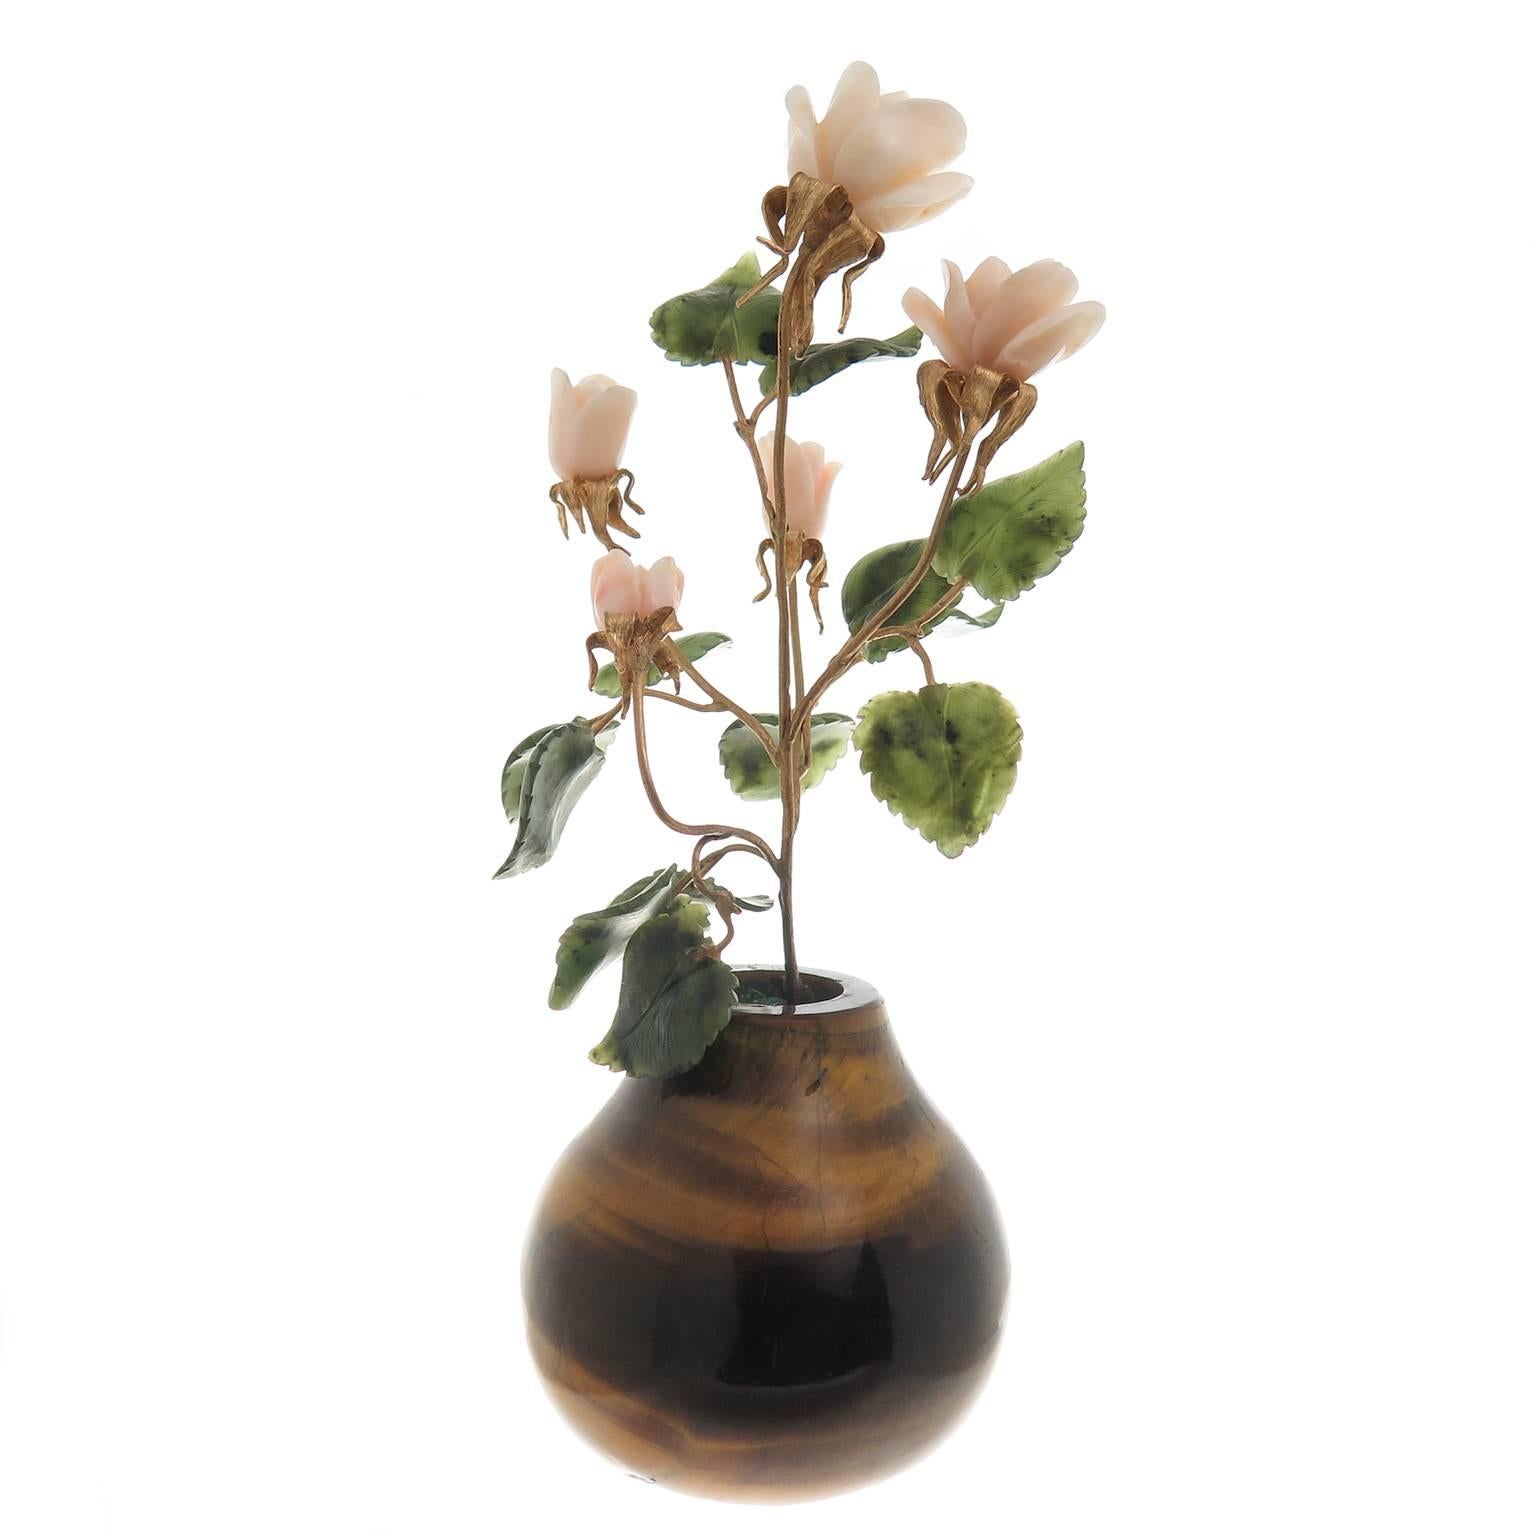 Circa 1970s Cartier Flowered plant in a Solid Tiger Eye Planter measuring 2 1/4 inch in height and 2 1/2 inch wide. The plant consists of Yellow Gold Branches and stems the flowers are carved Angel Skin Coral and the Leaves are Carved Nephrite.